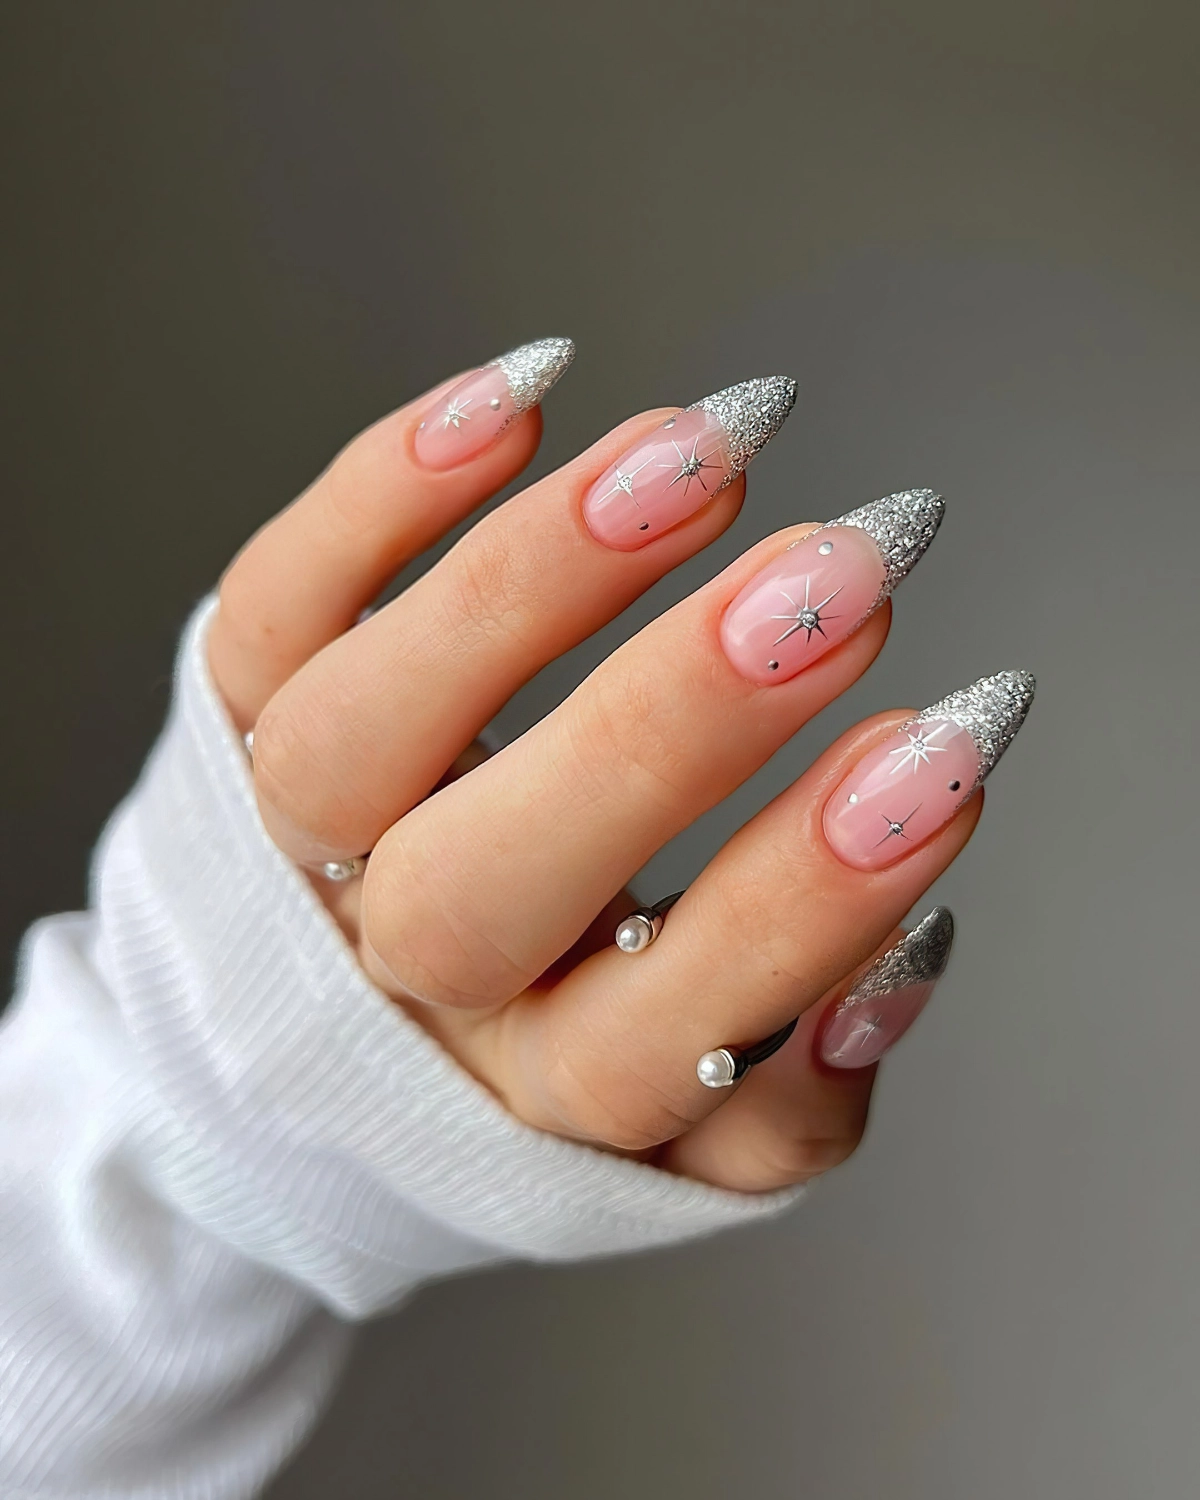 naegel glitzer french nails in silbern spitze naegel